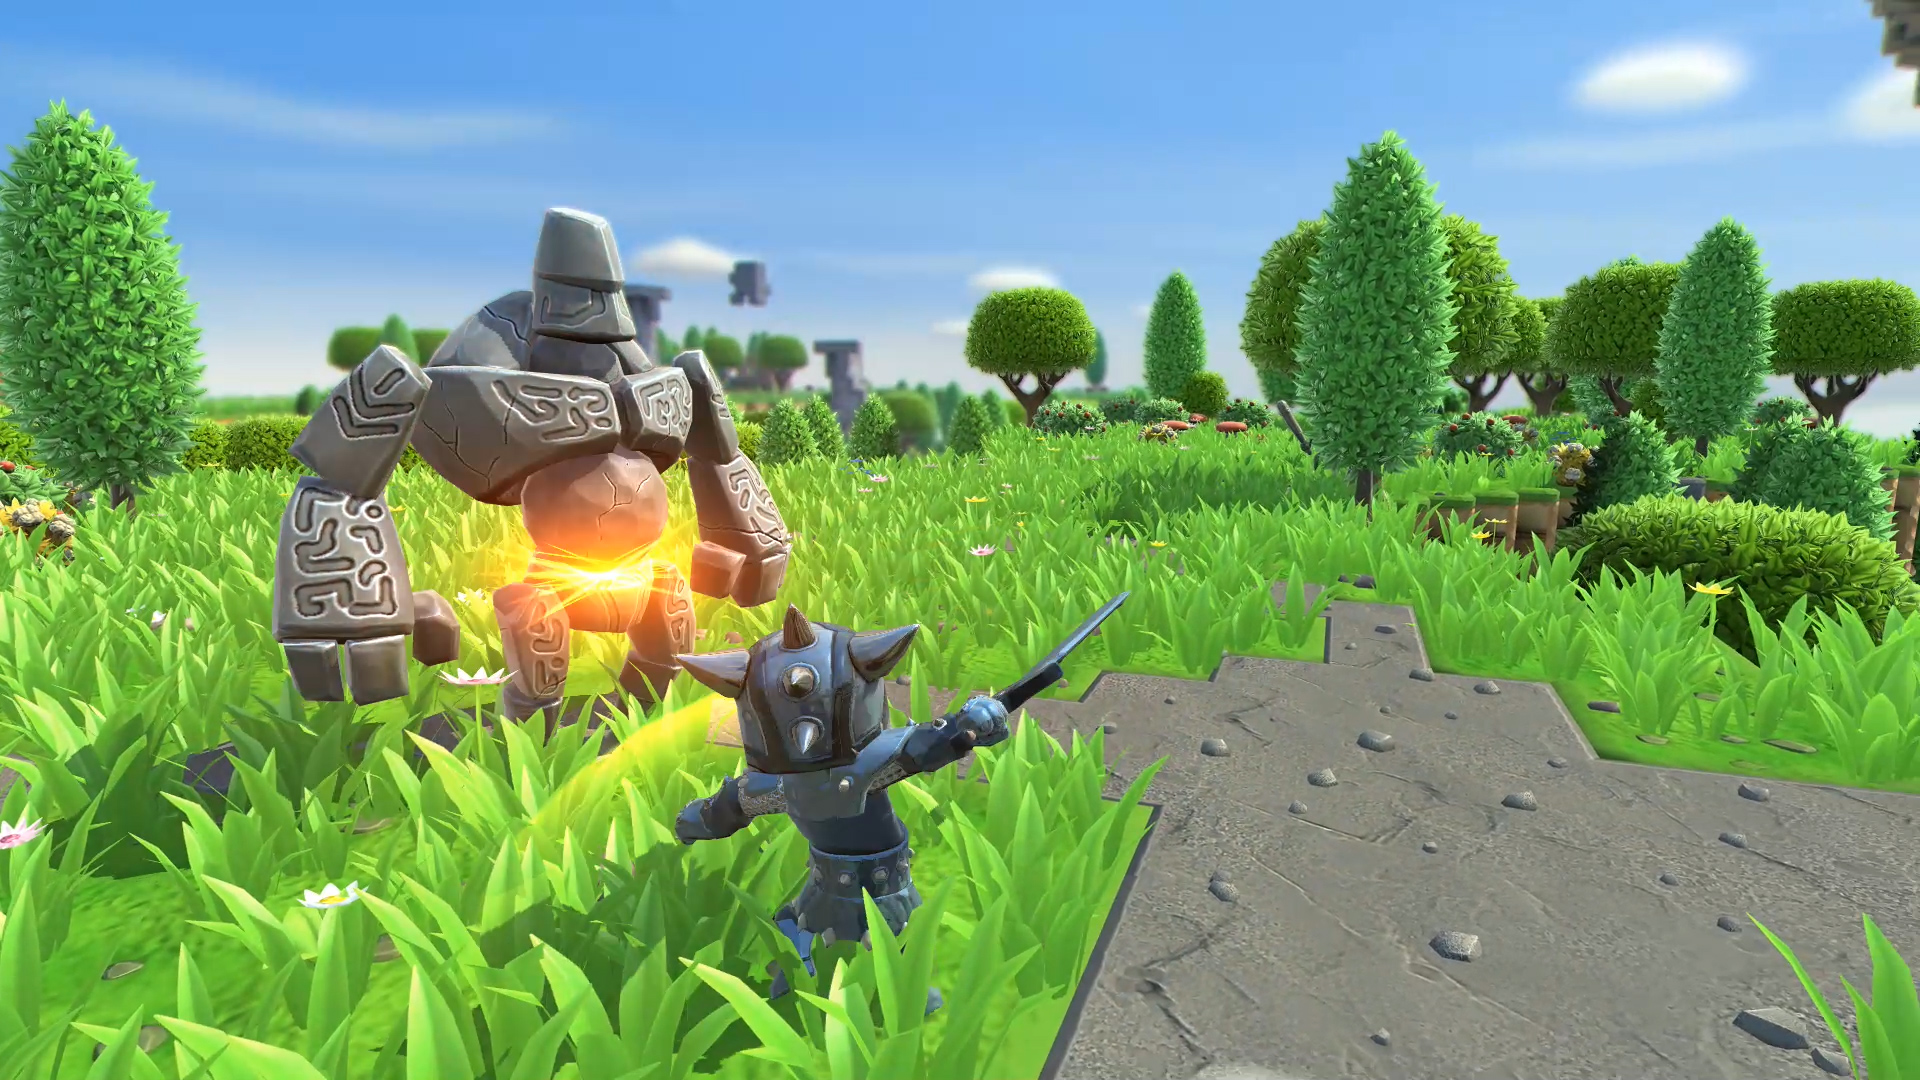 Portal Knights is on the PS Plus free games January 2019 list.